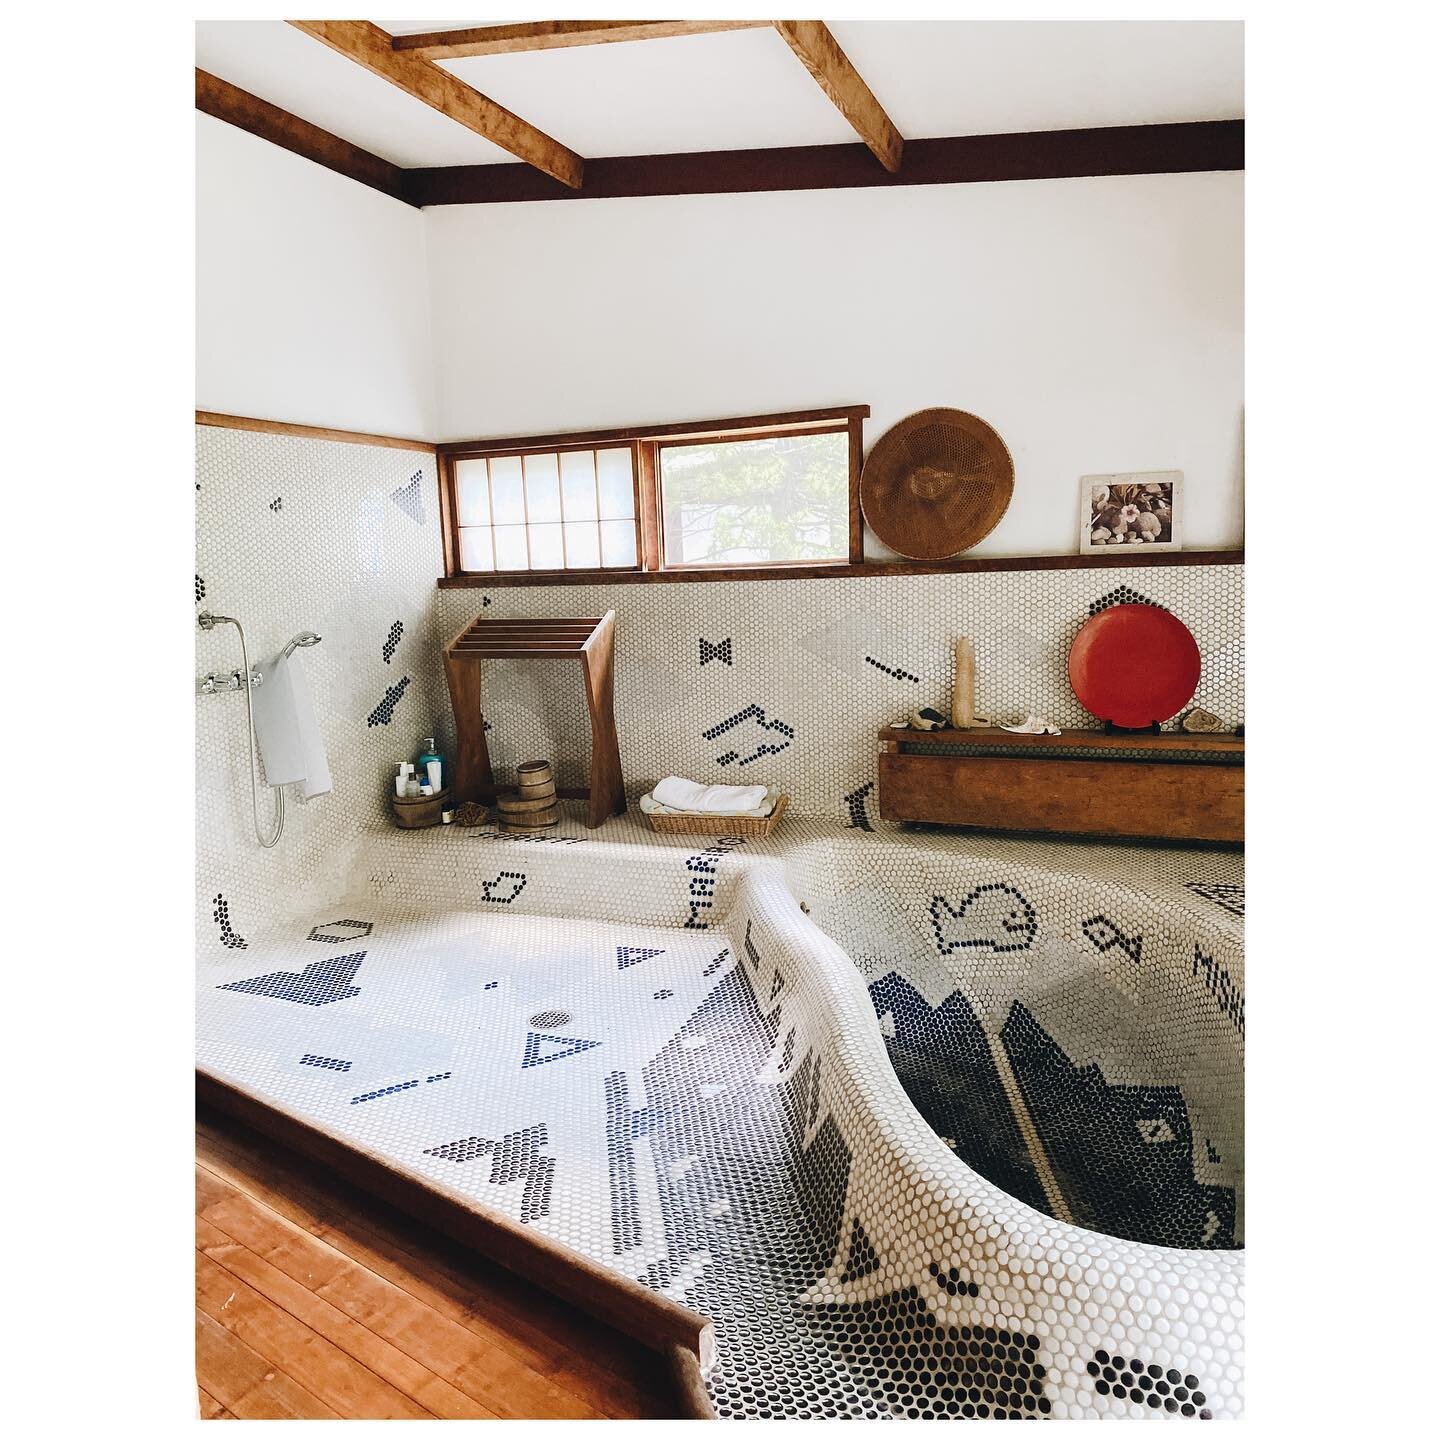 Another favorite room from #georgenakashima studio from our visit on Saturday. Maybe because we are renovating our own bathrooms ;)